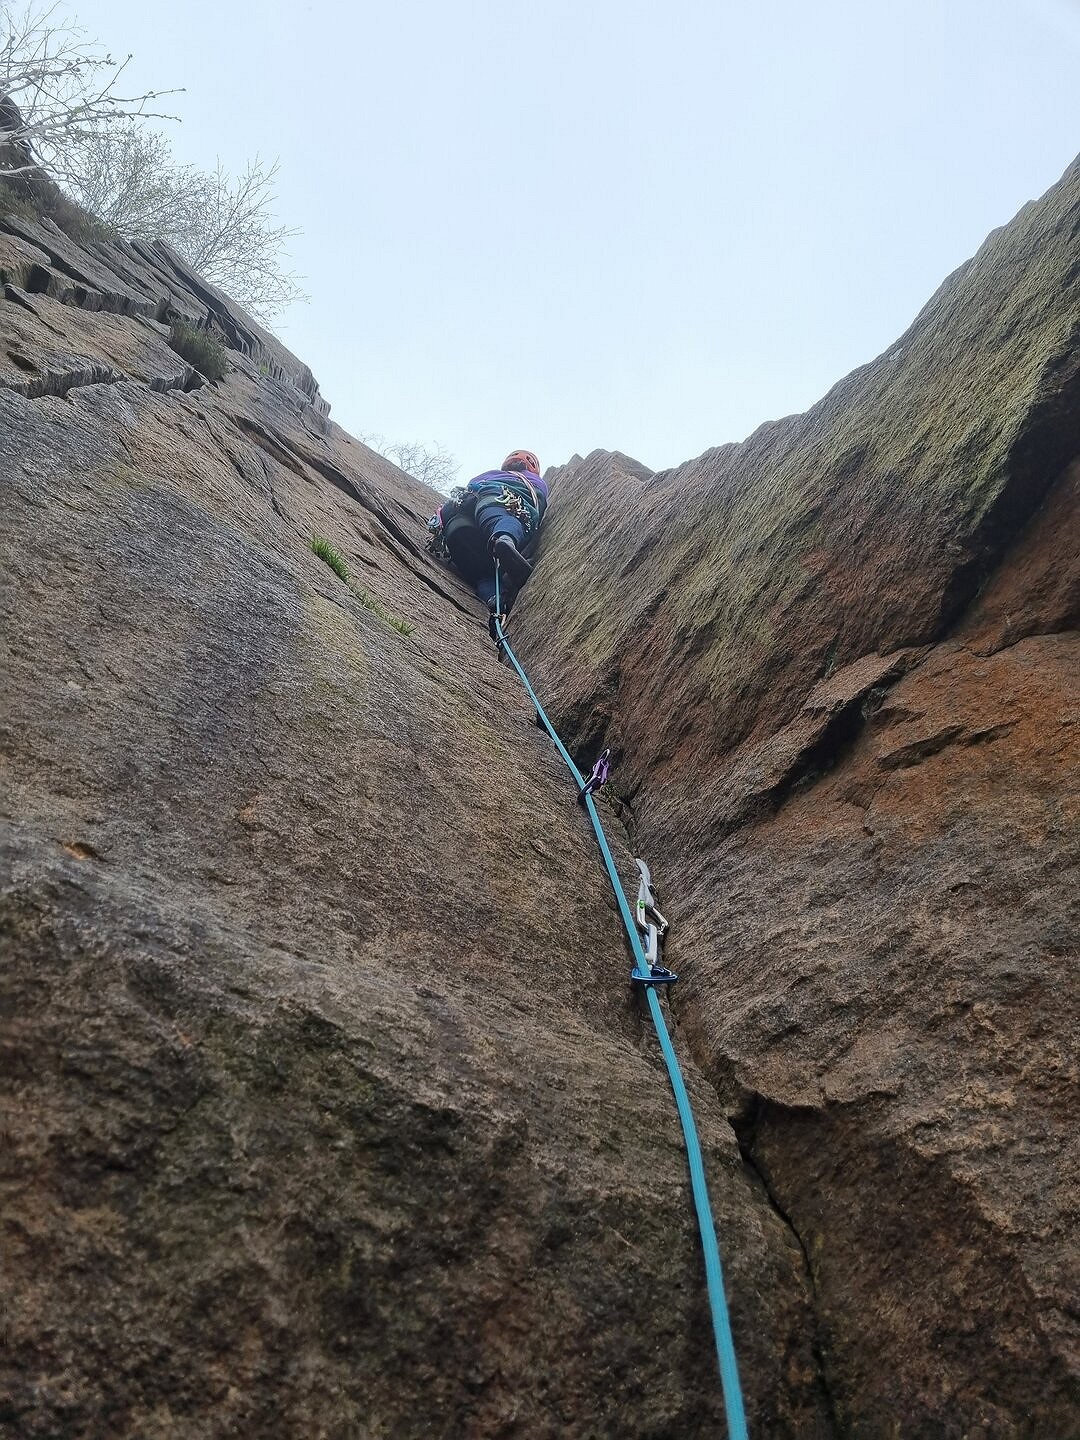 Rion nearing the top of Hells Bells  © EHarrison